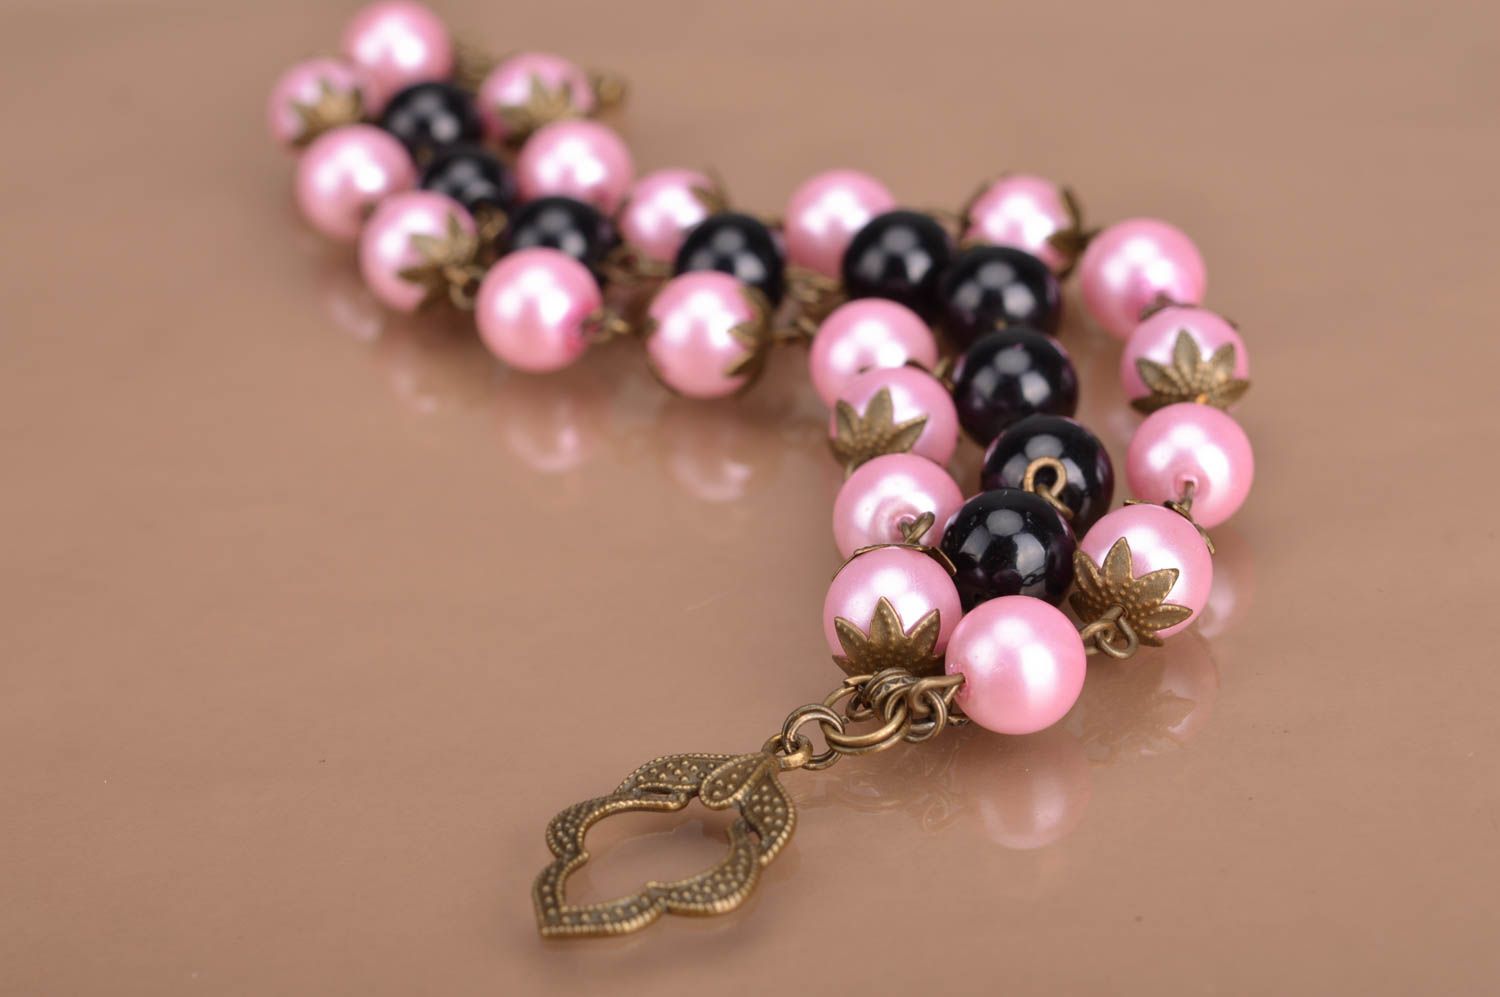 Handmade designer women's wrist bracelet with pink and black beads and charm photo 5